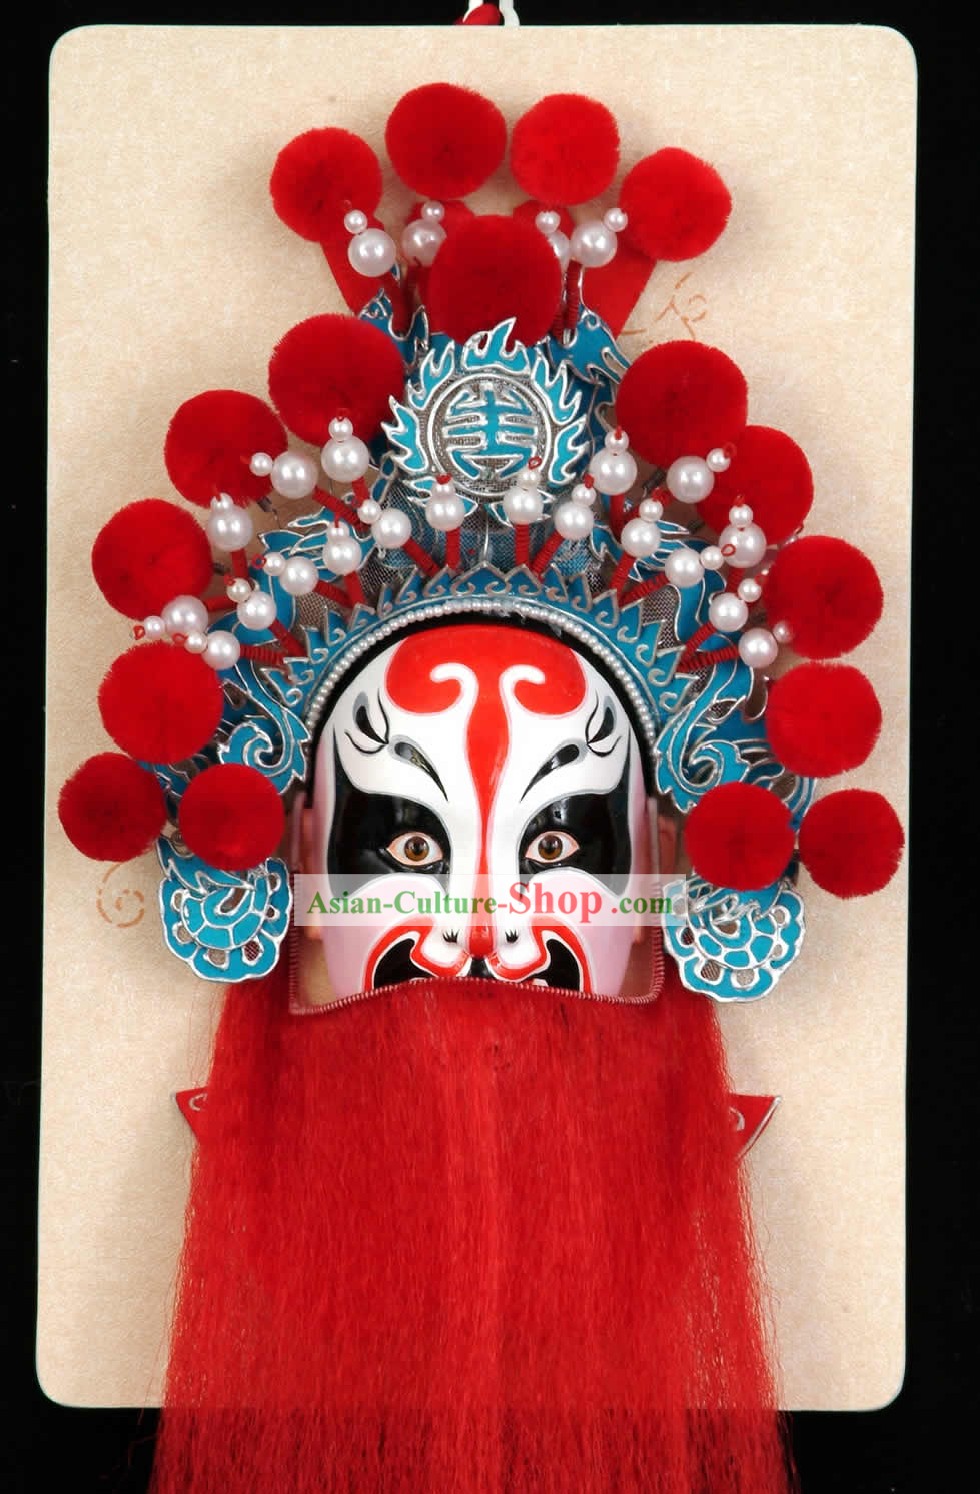 Handcrafted Peking Opera Décoration Masque Hanging - Meng Liang